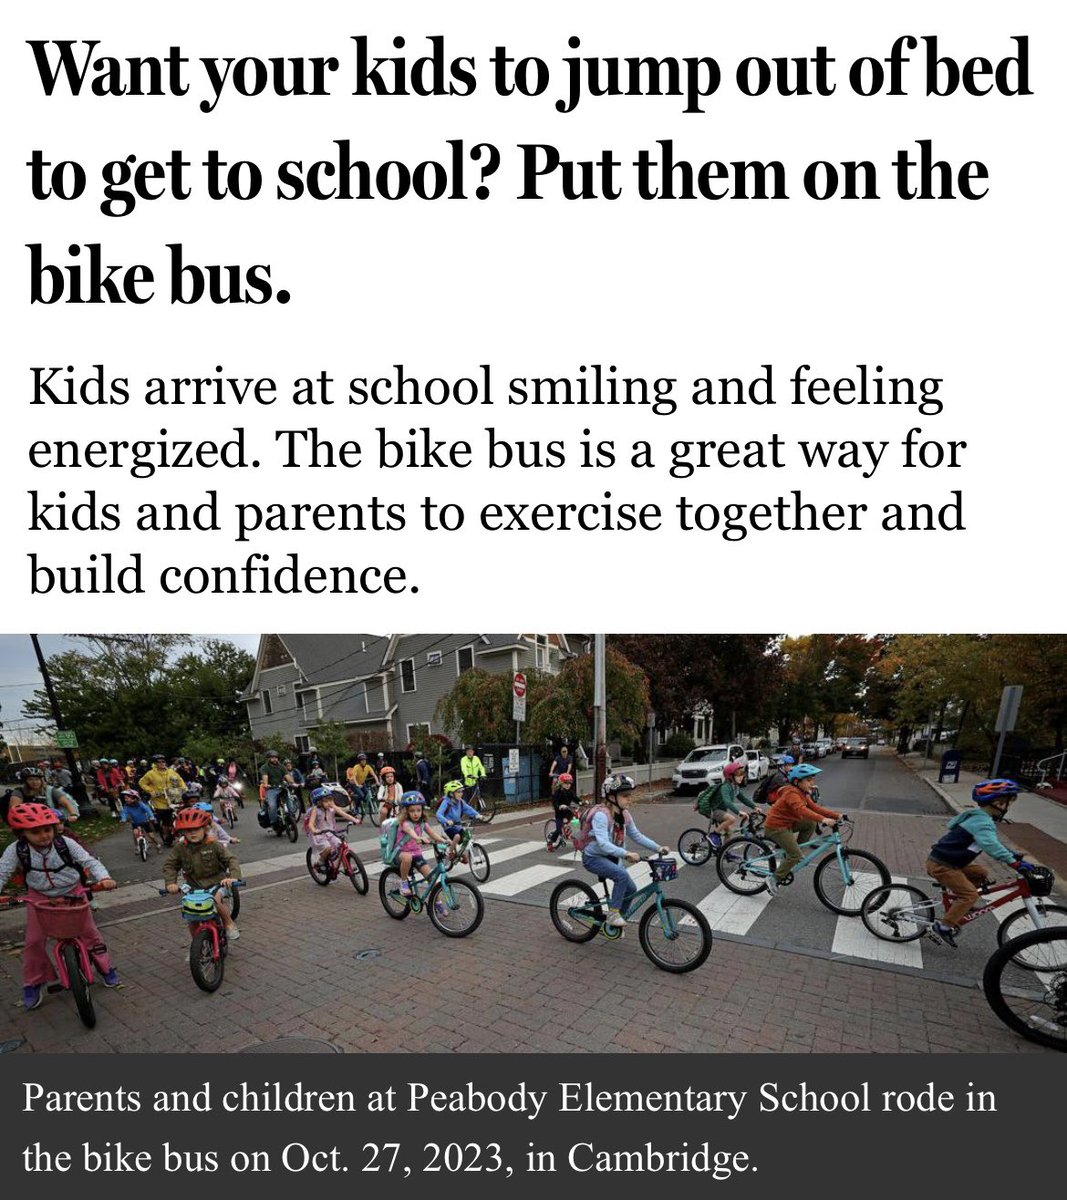 “Nearly 50 percent of American school-age children walked or biked to school in the late 1960s. In 2009, only 13 percent did.” The Bike Bus movement, led in large part by @CoachBalto/@BikeBusWorld has helped countless children and families bike to school safely and joyfully 👏❤️